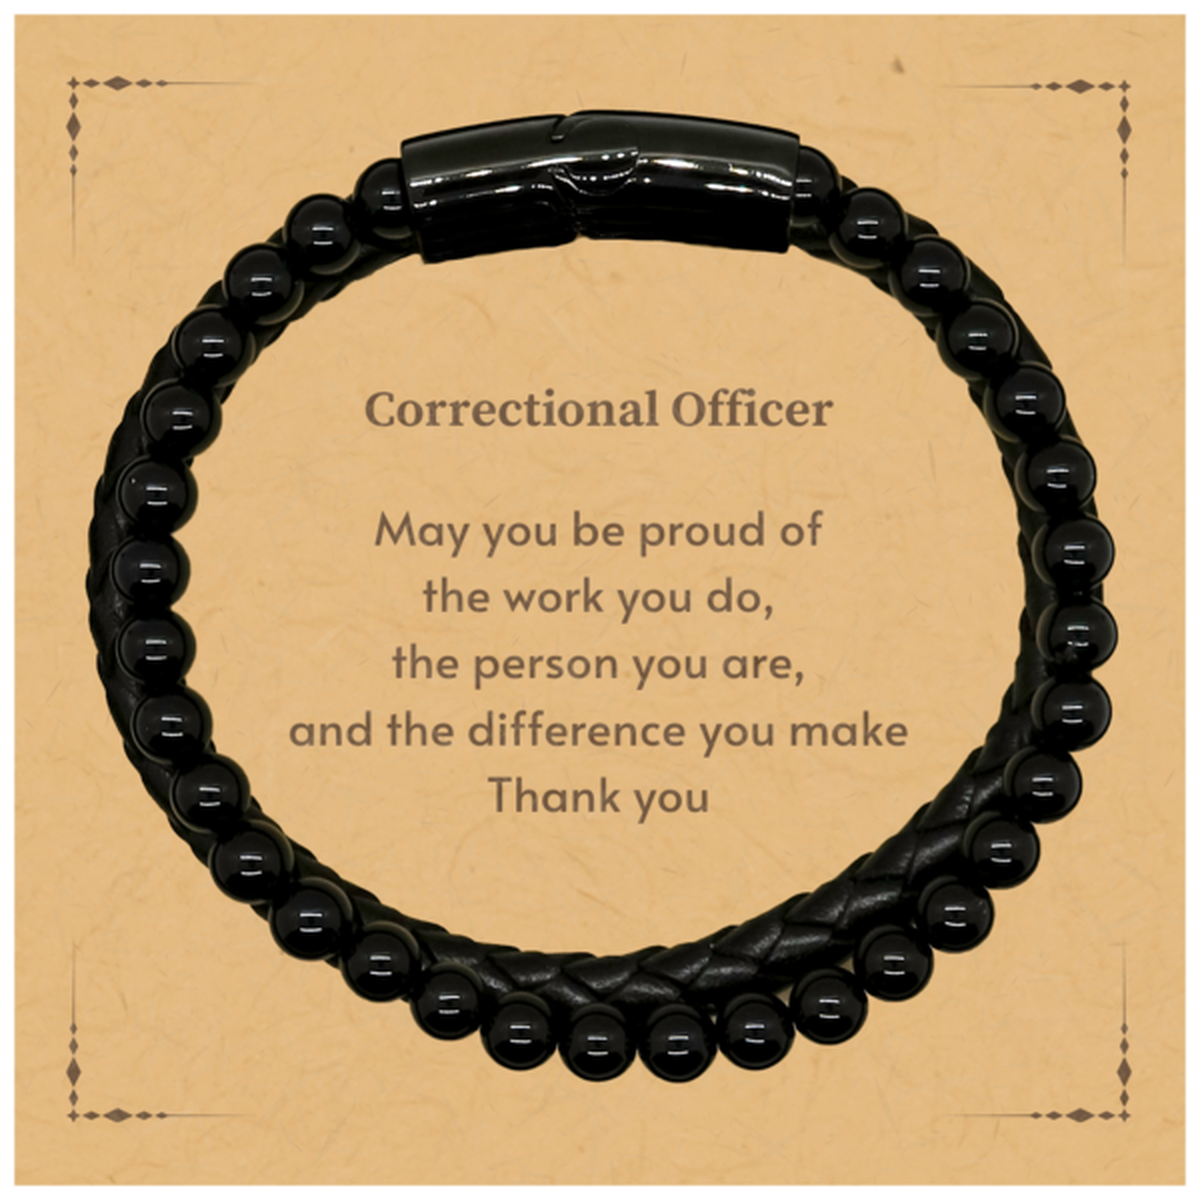 Heartwarming Stone Leather Bracelets Retirement Coworkers Gifts for Correctional Officer, Correctional Officer May You be proud of the work you do, the person you are Gifts for Boss Men Women Friends